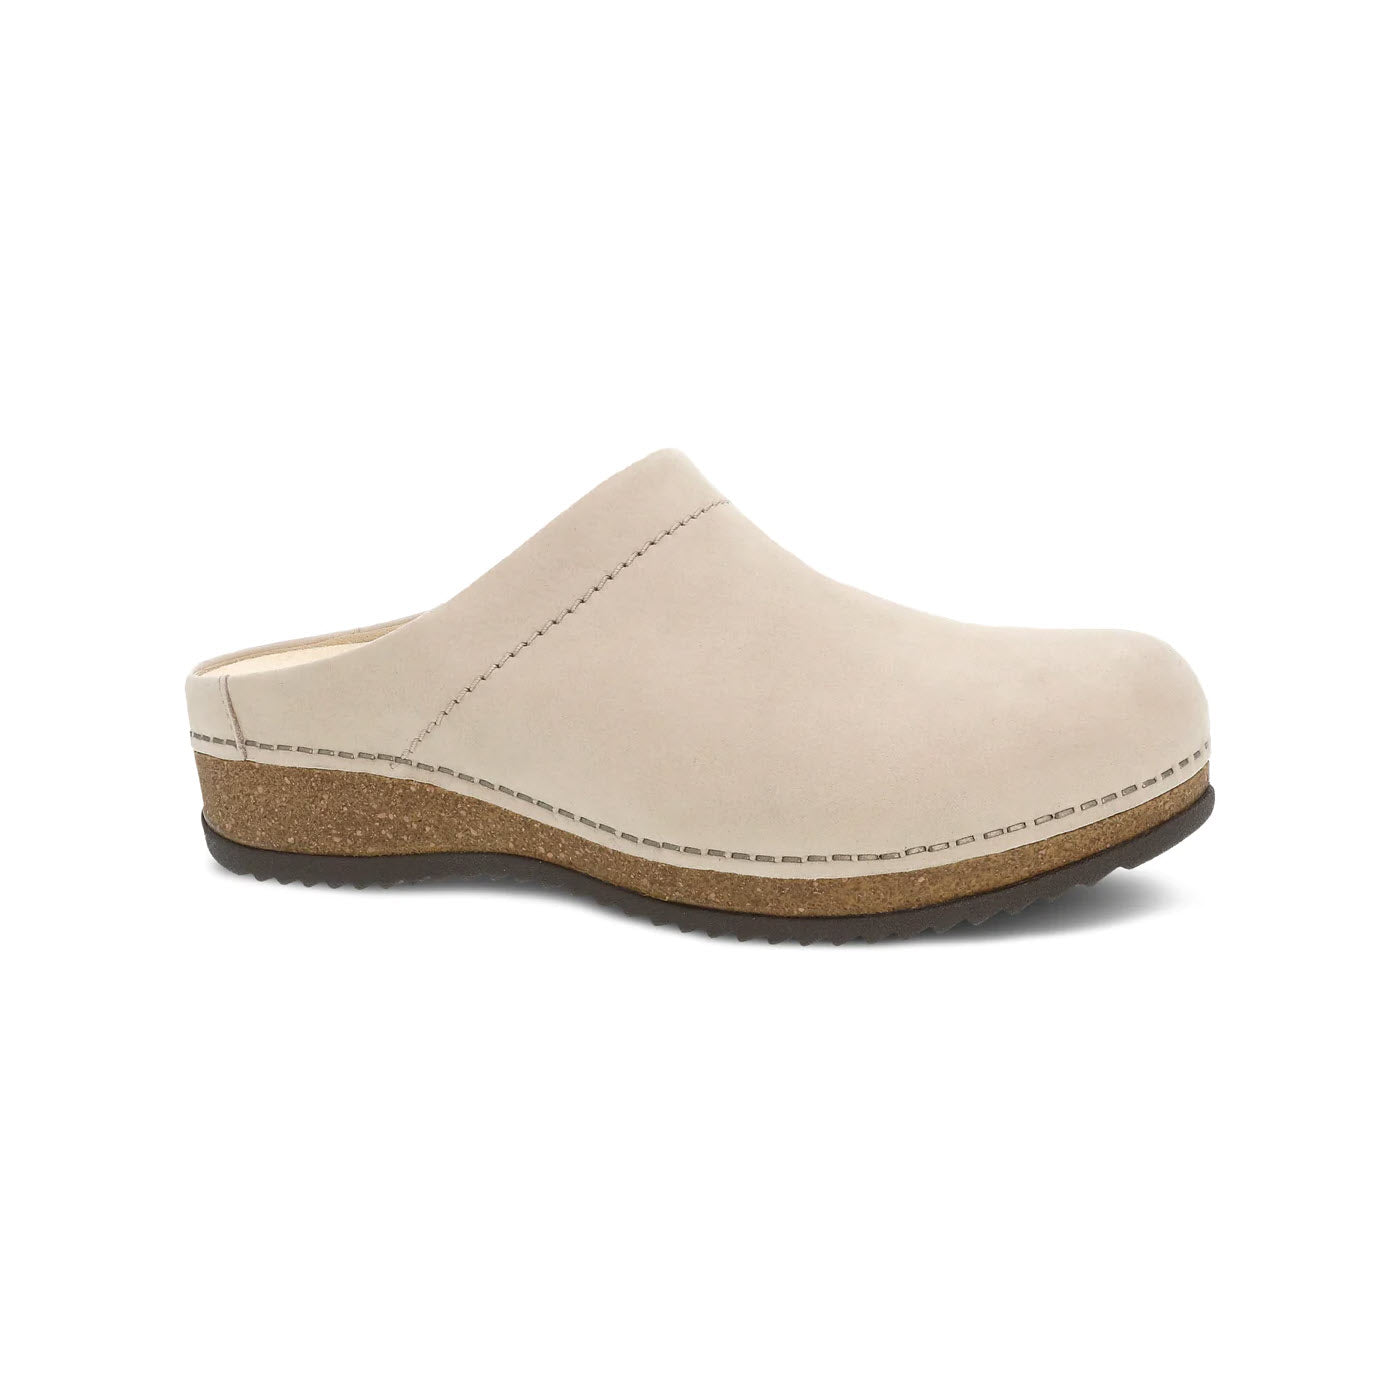 A beige leather open back clog with a cork sole, isolated on a white background, such as the Dansko Mariella Linen - Womens.